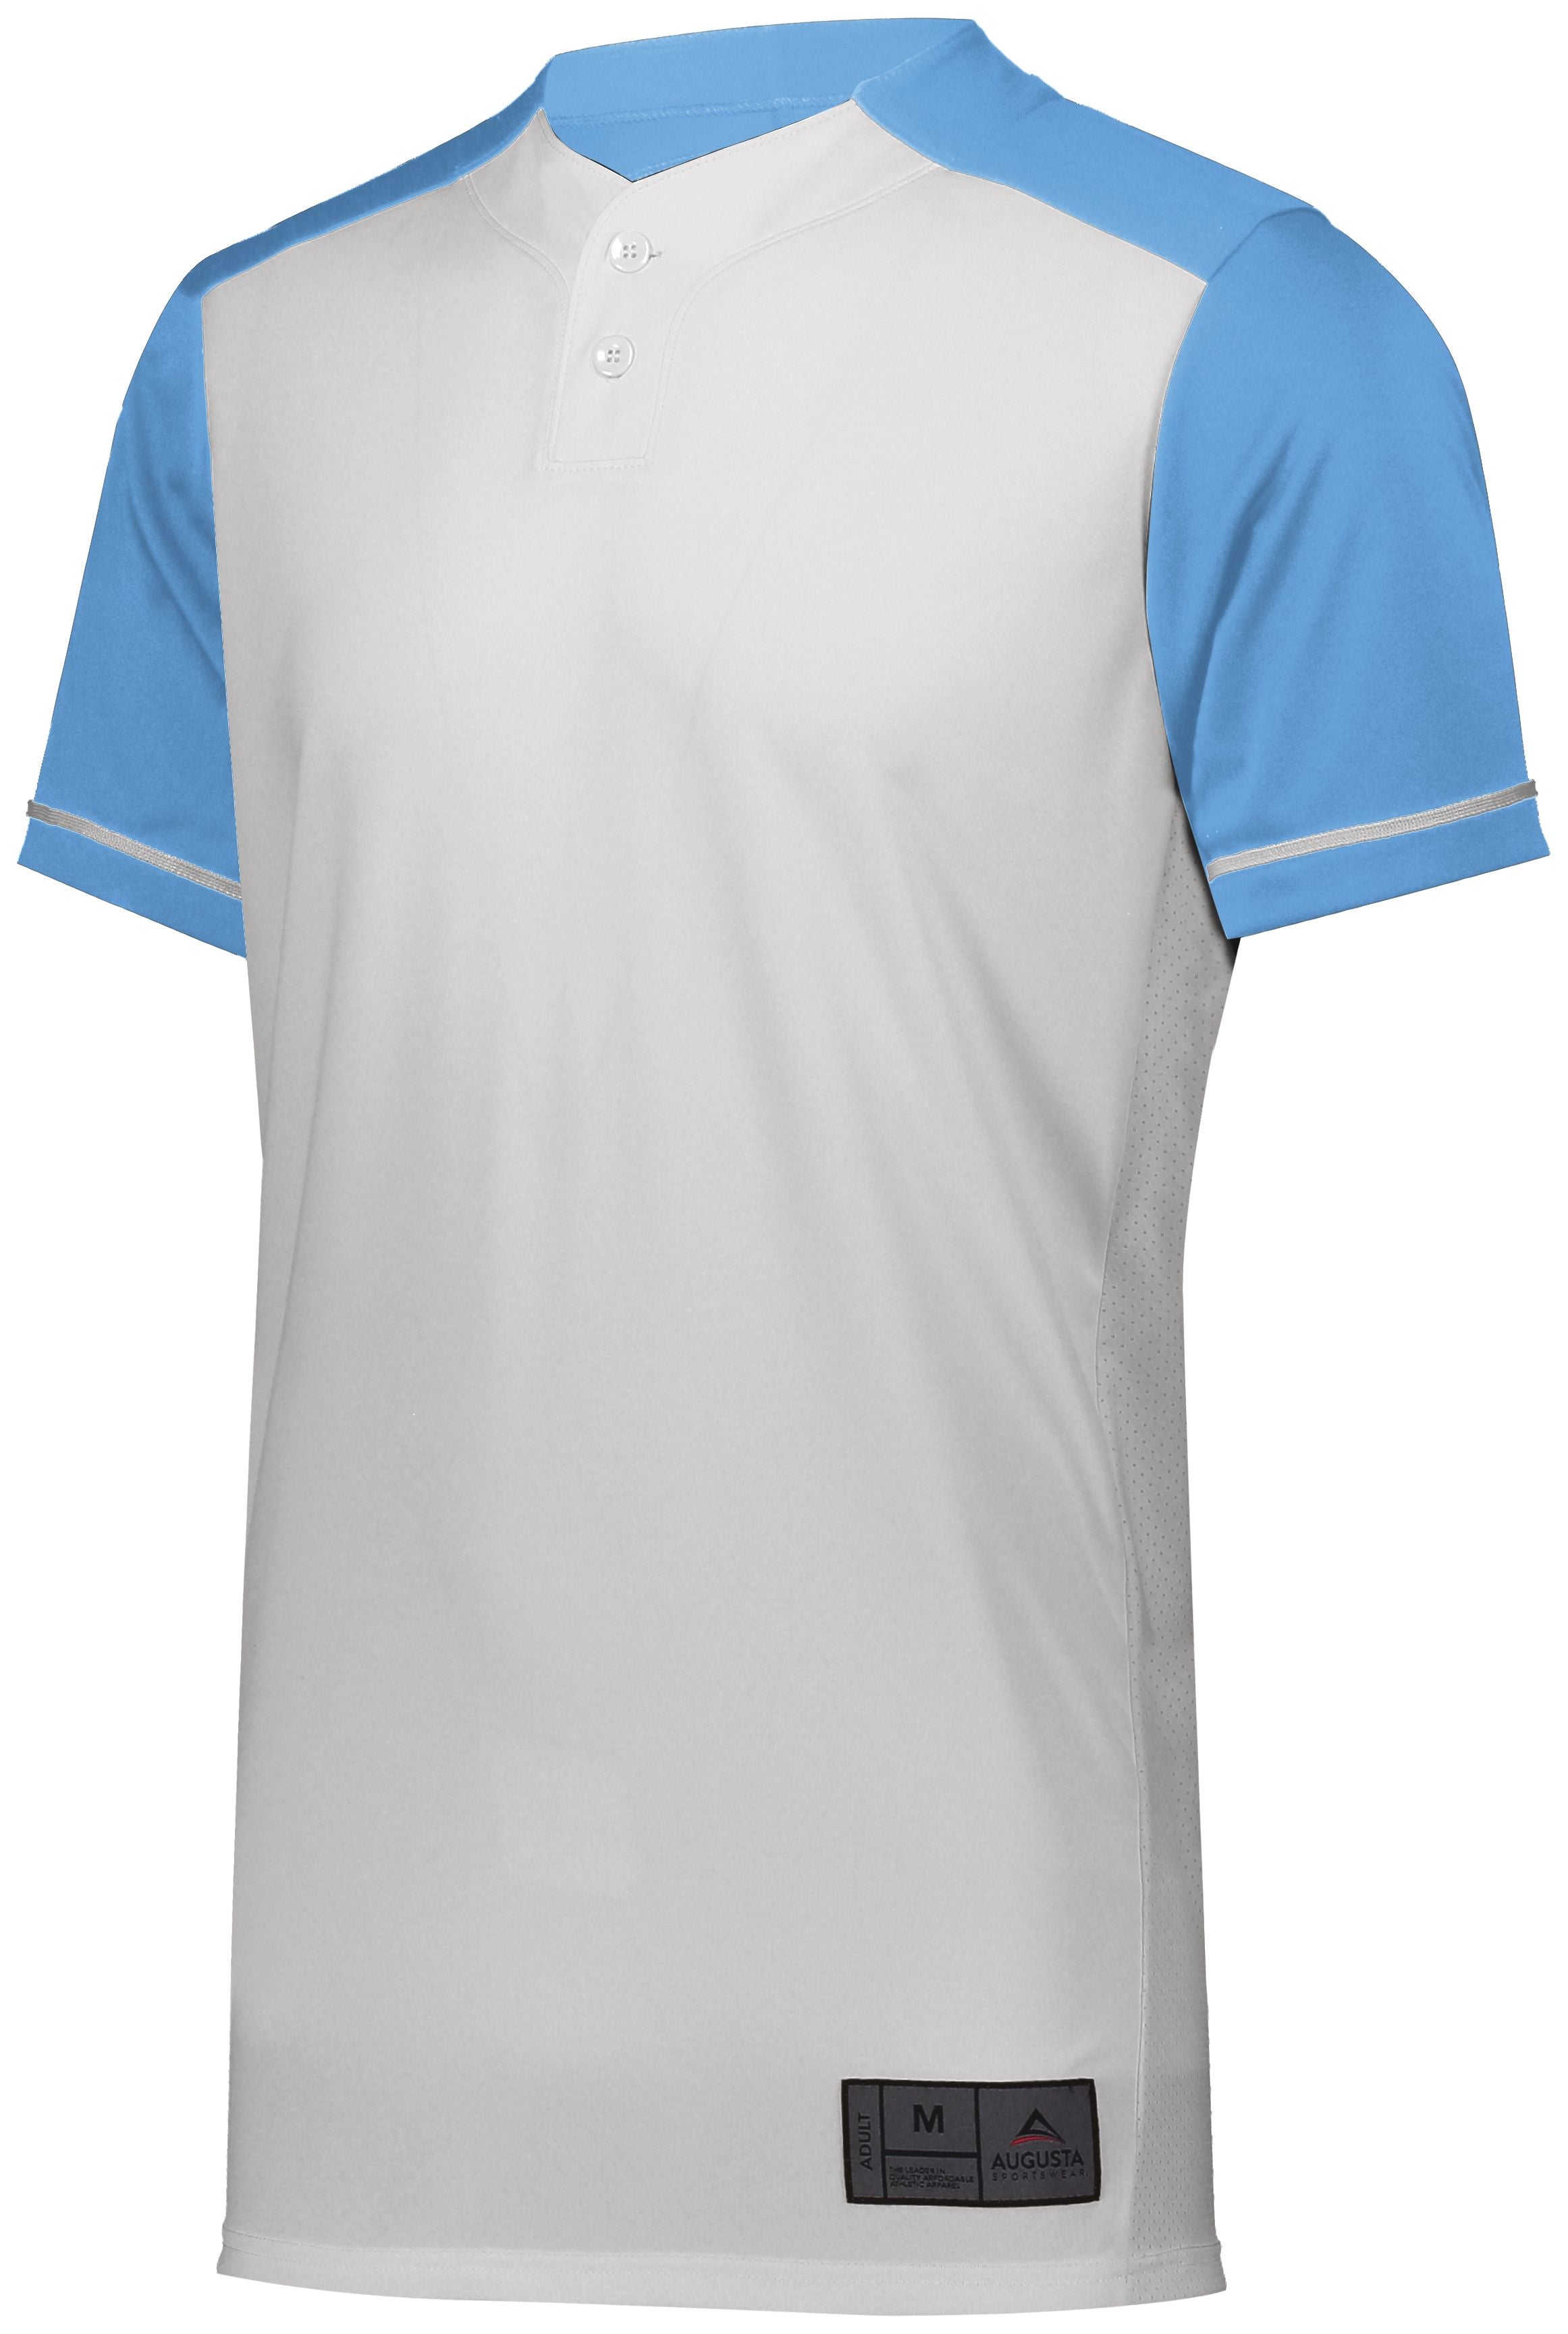 Augusta Sportswear Youth Closer Jersey in White/Columbia Blue  -Part of the Youth, Youth-Jersey, Augusta-Products, Baseball, Shirts, All-Sports, All-Sports-1 product lines at KanaleyCreations.com